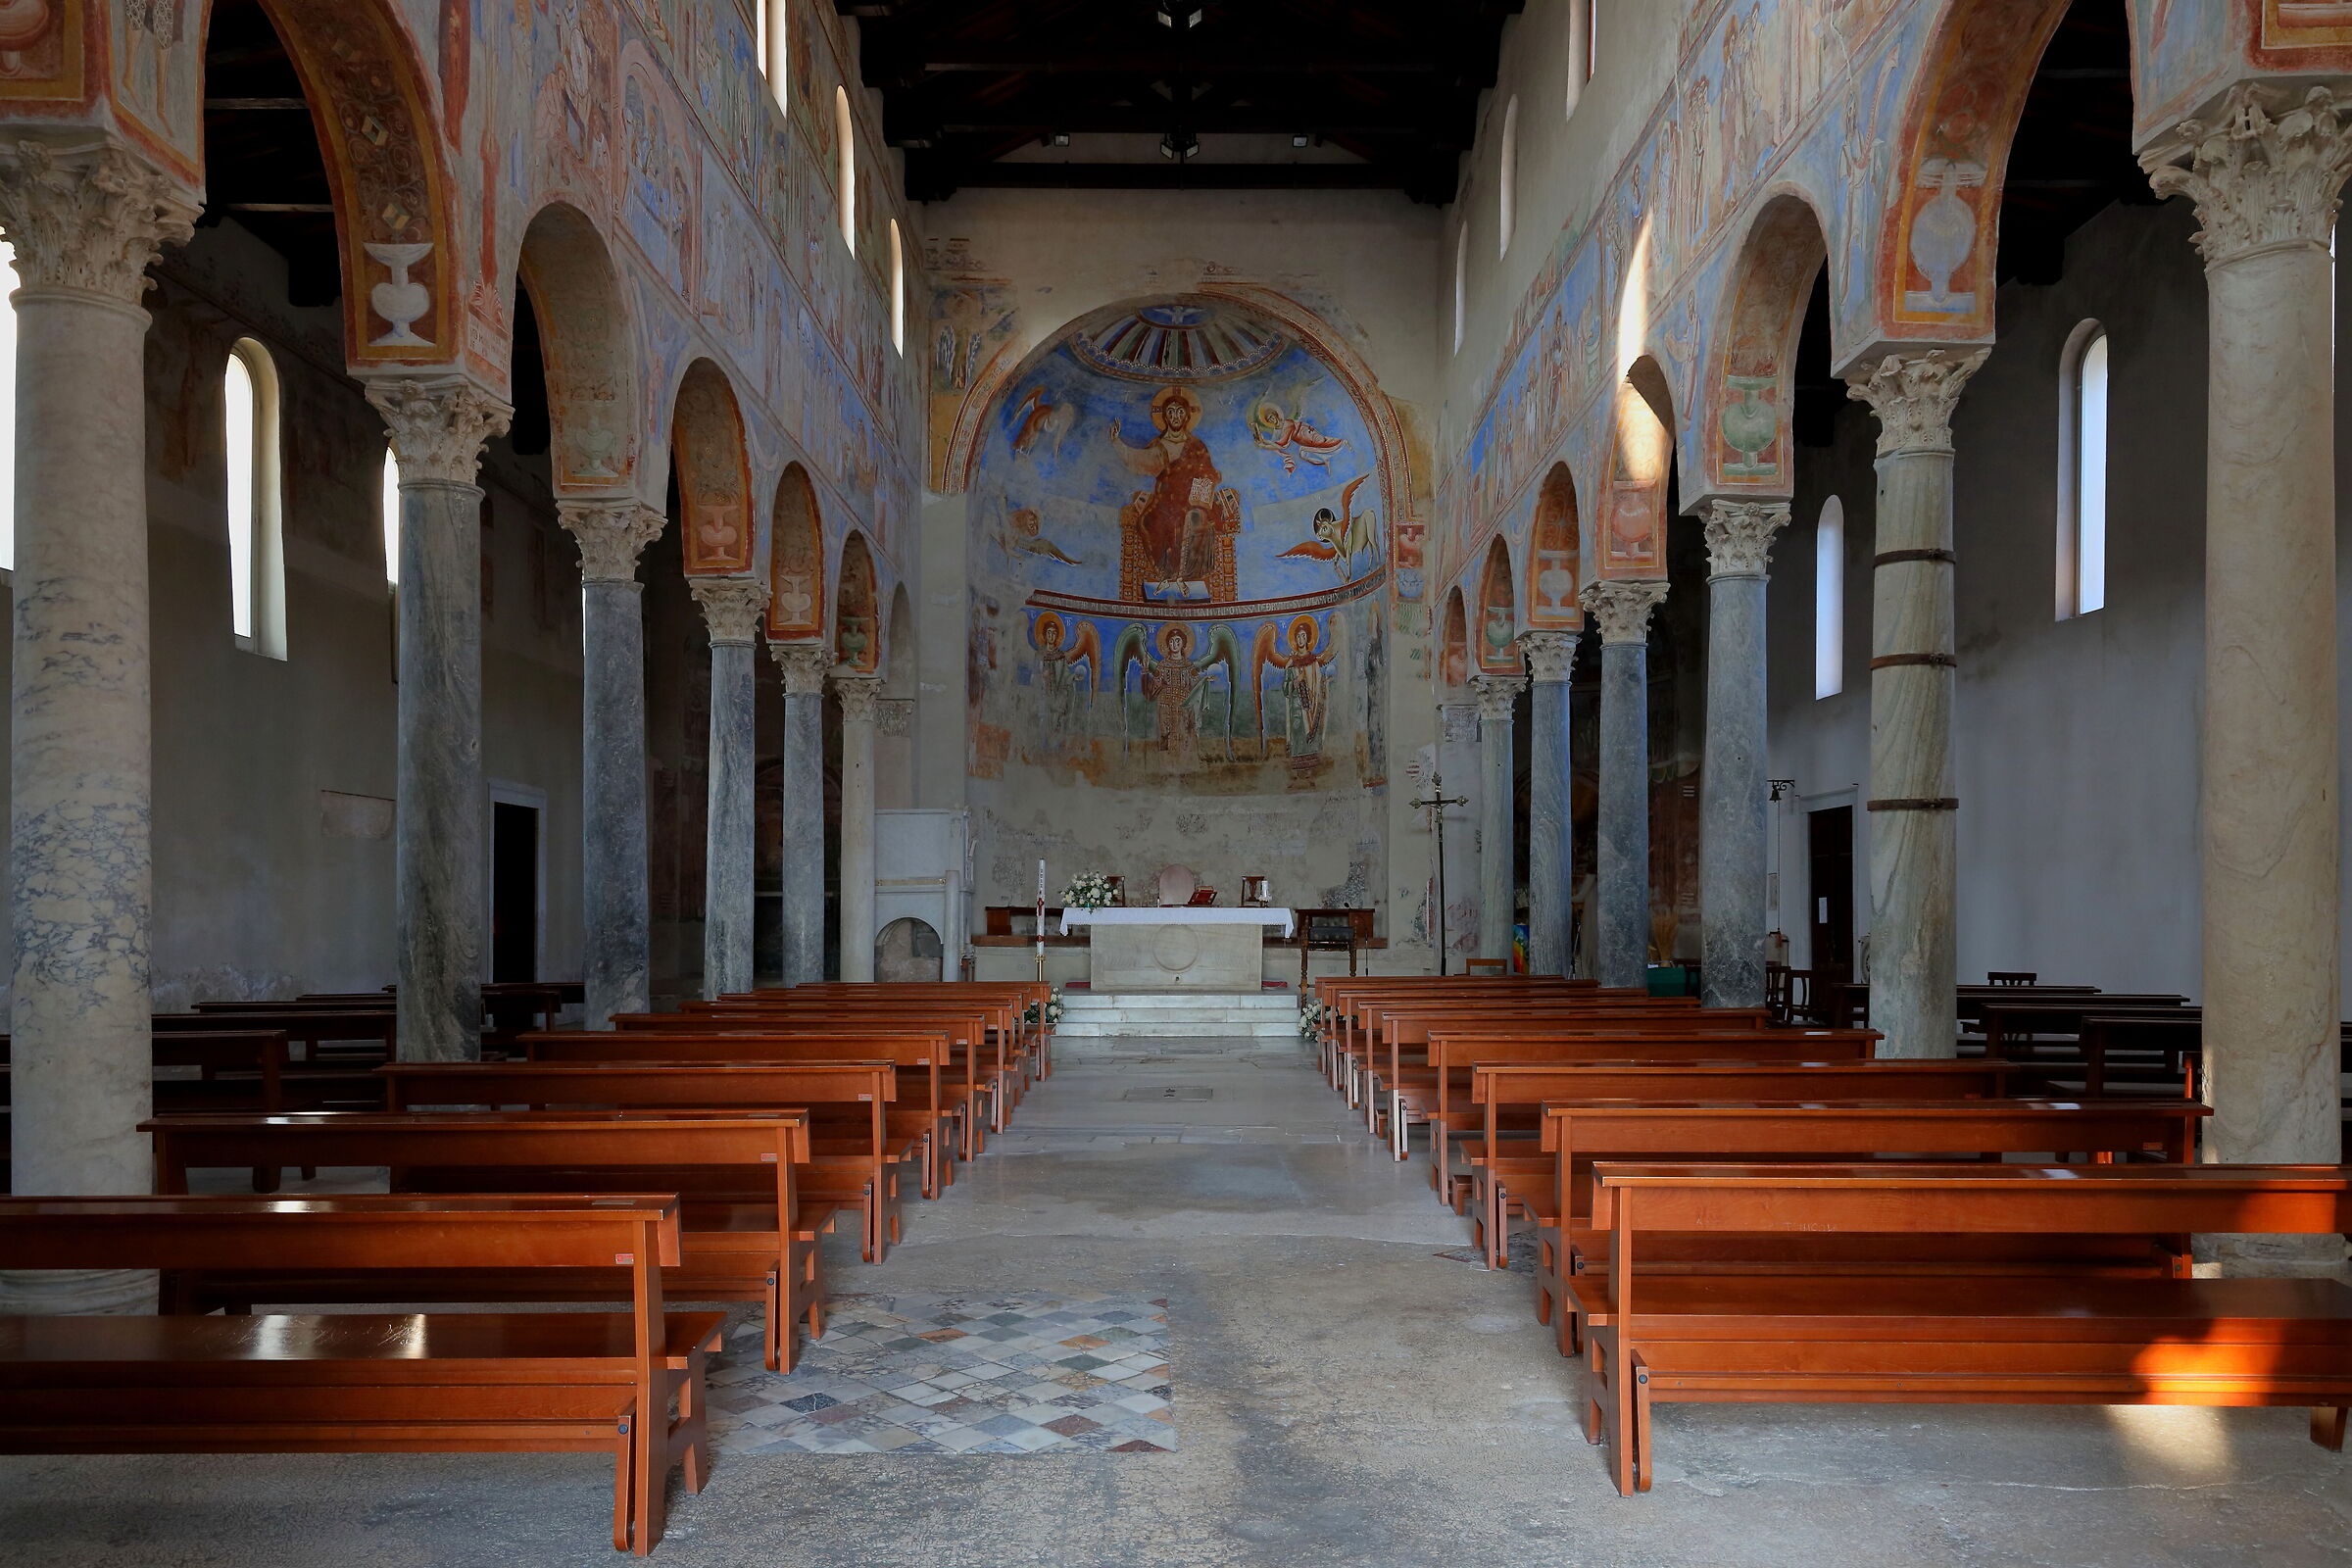 The frescoes of Sant'Angelo in Formis...